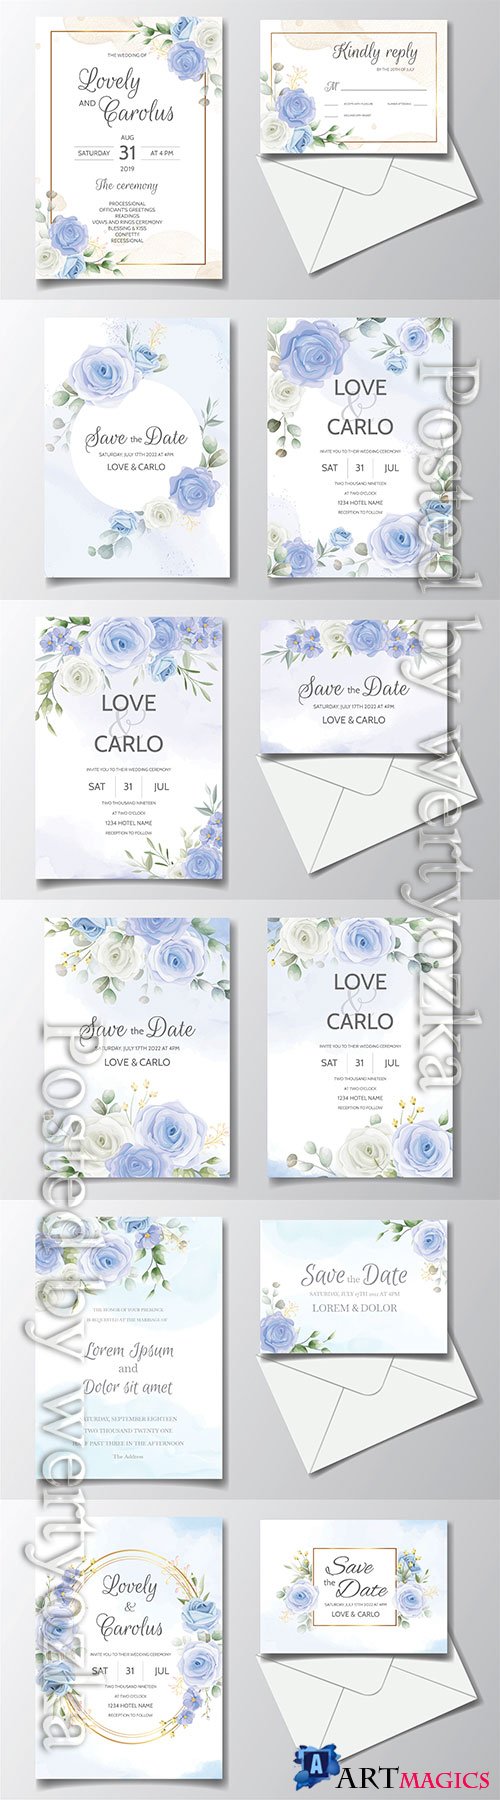 Vintage wedding invitation with blue roses in vector